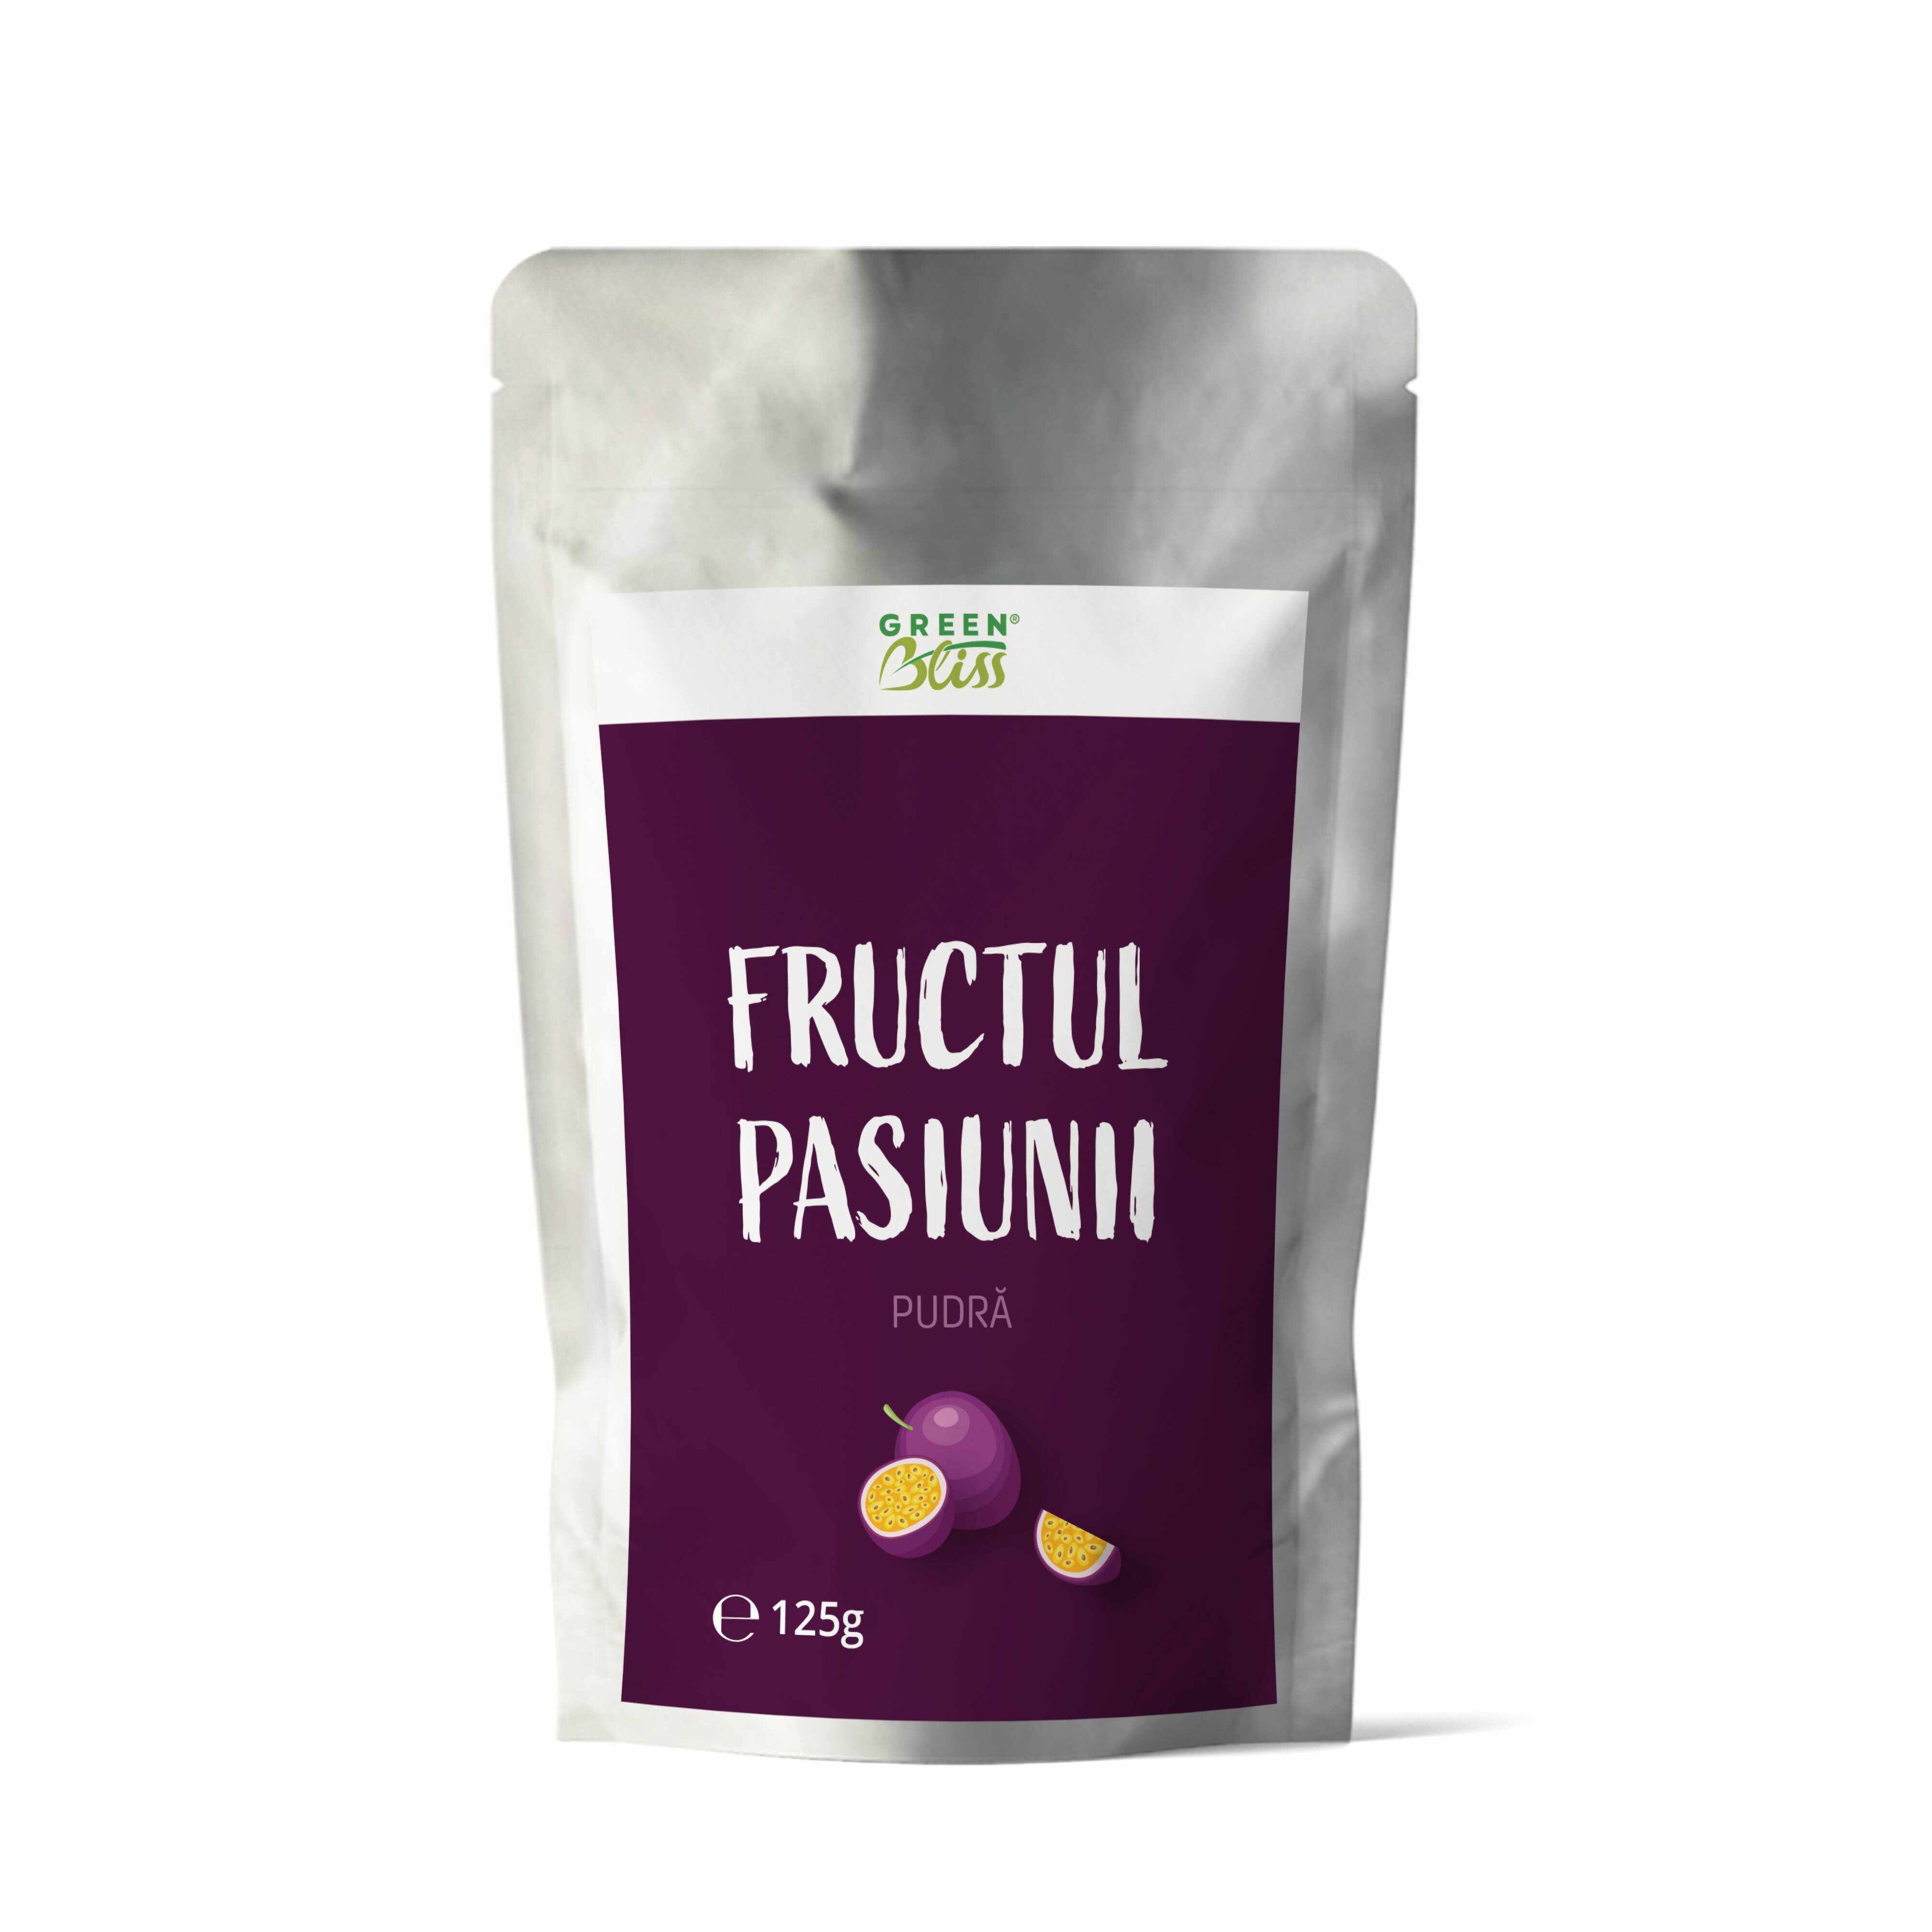 Fructul pasiunii pulbere, 125g - Green Bliss